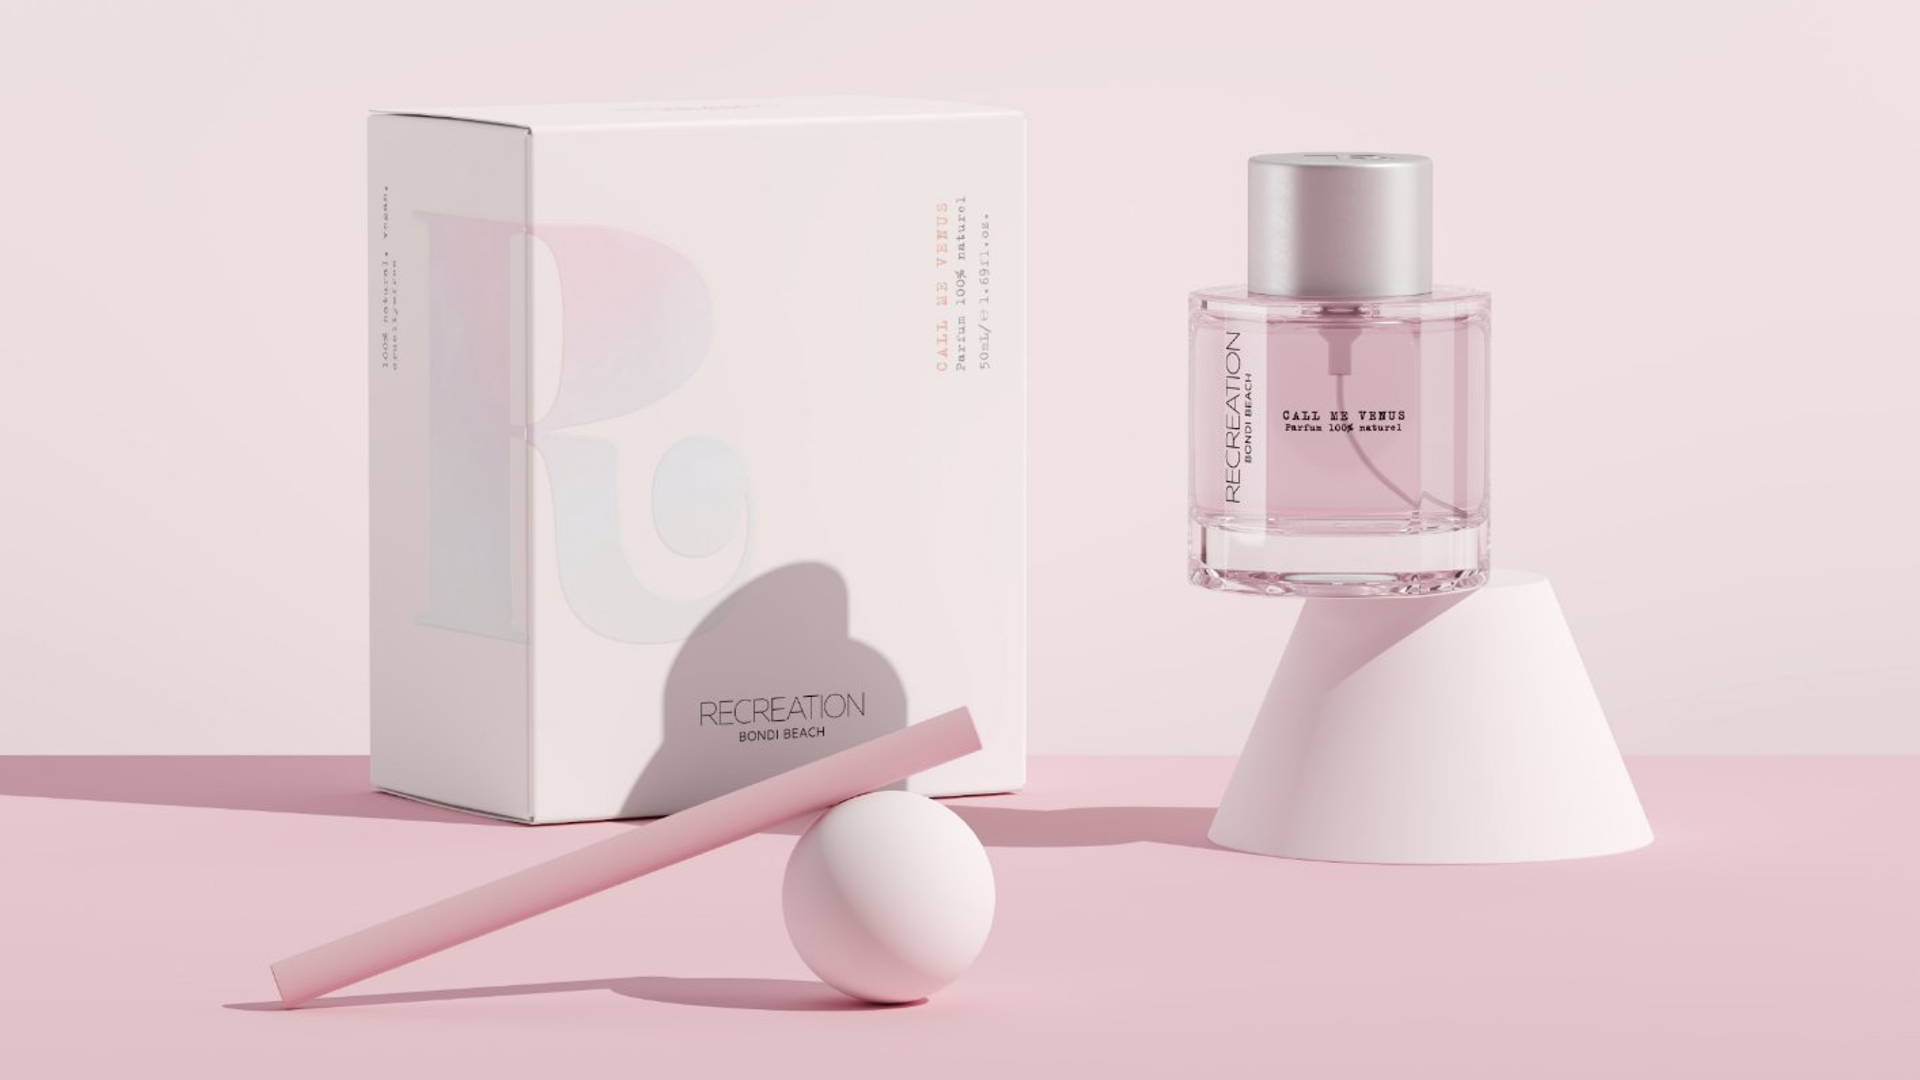 Featured image for This Australian Fragrance Brand Values Fun, Healthiness & Happiness